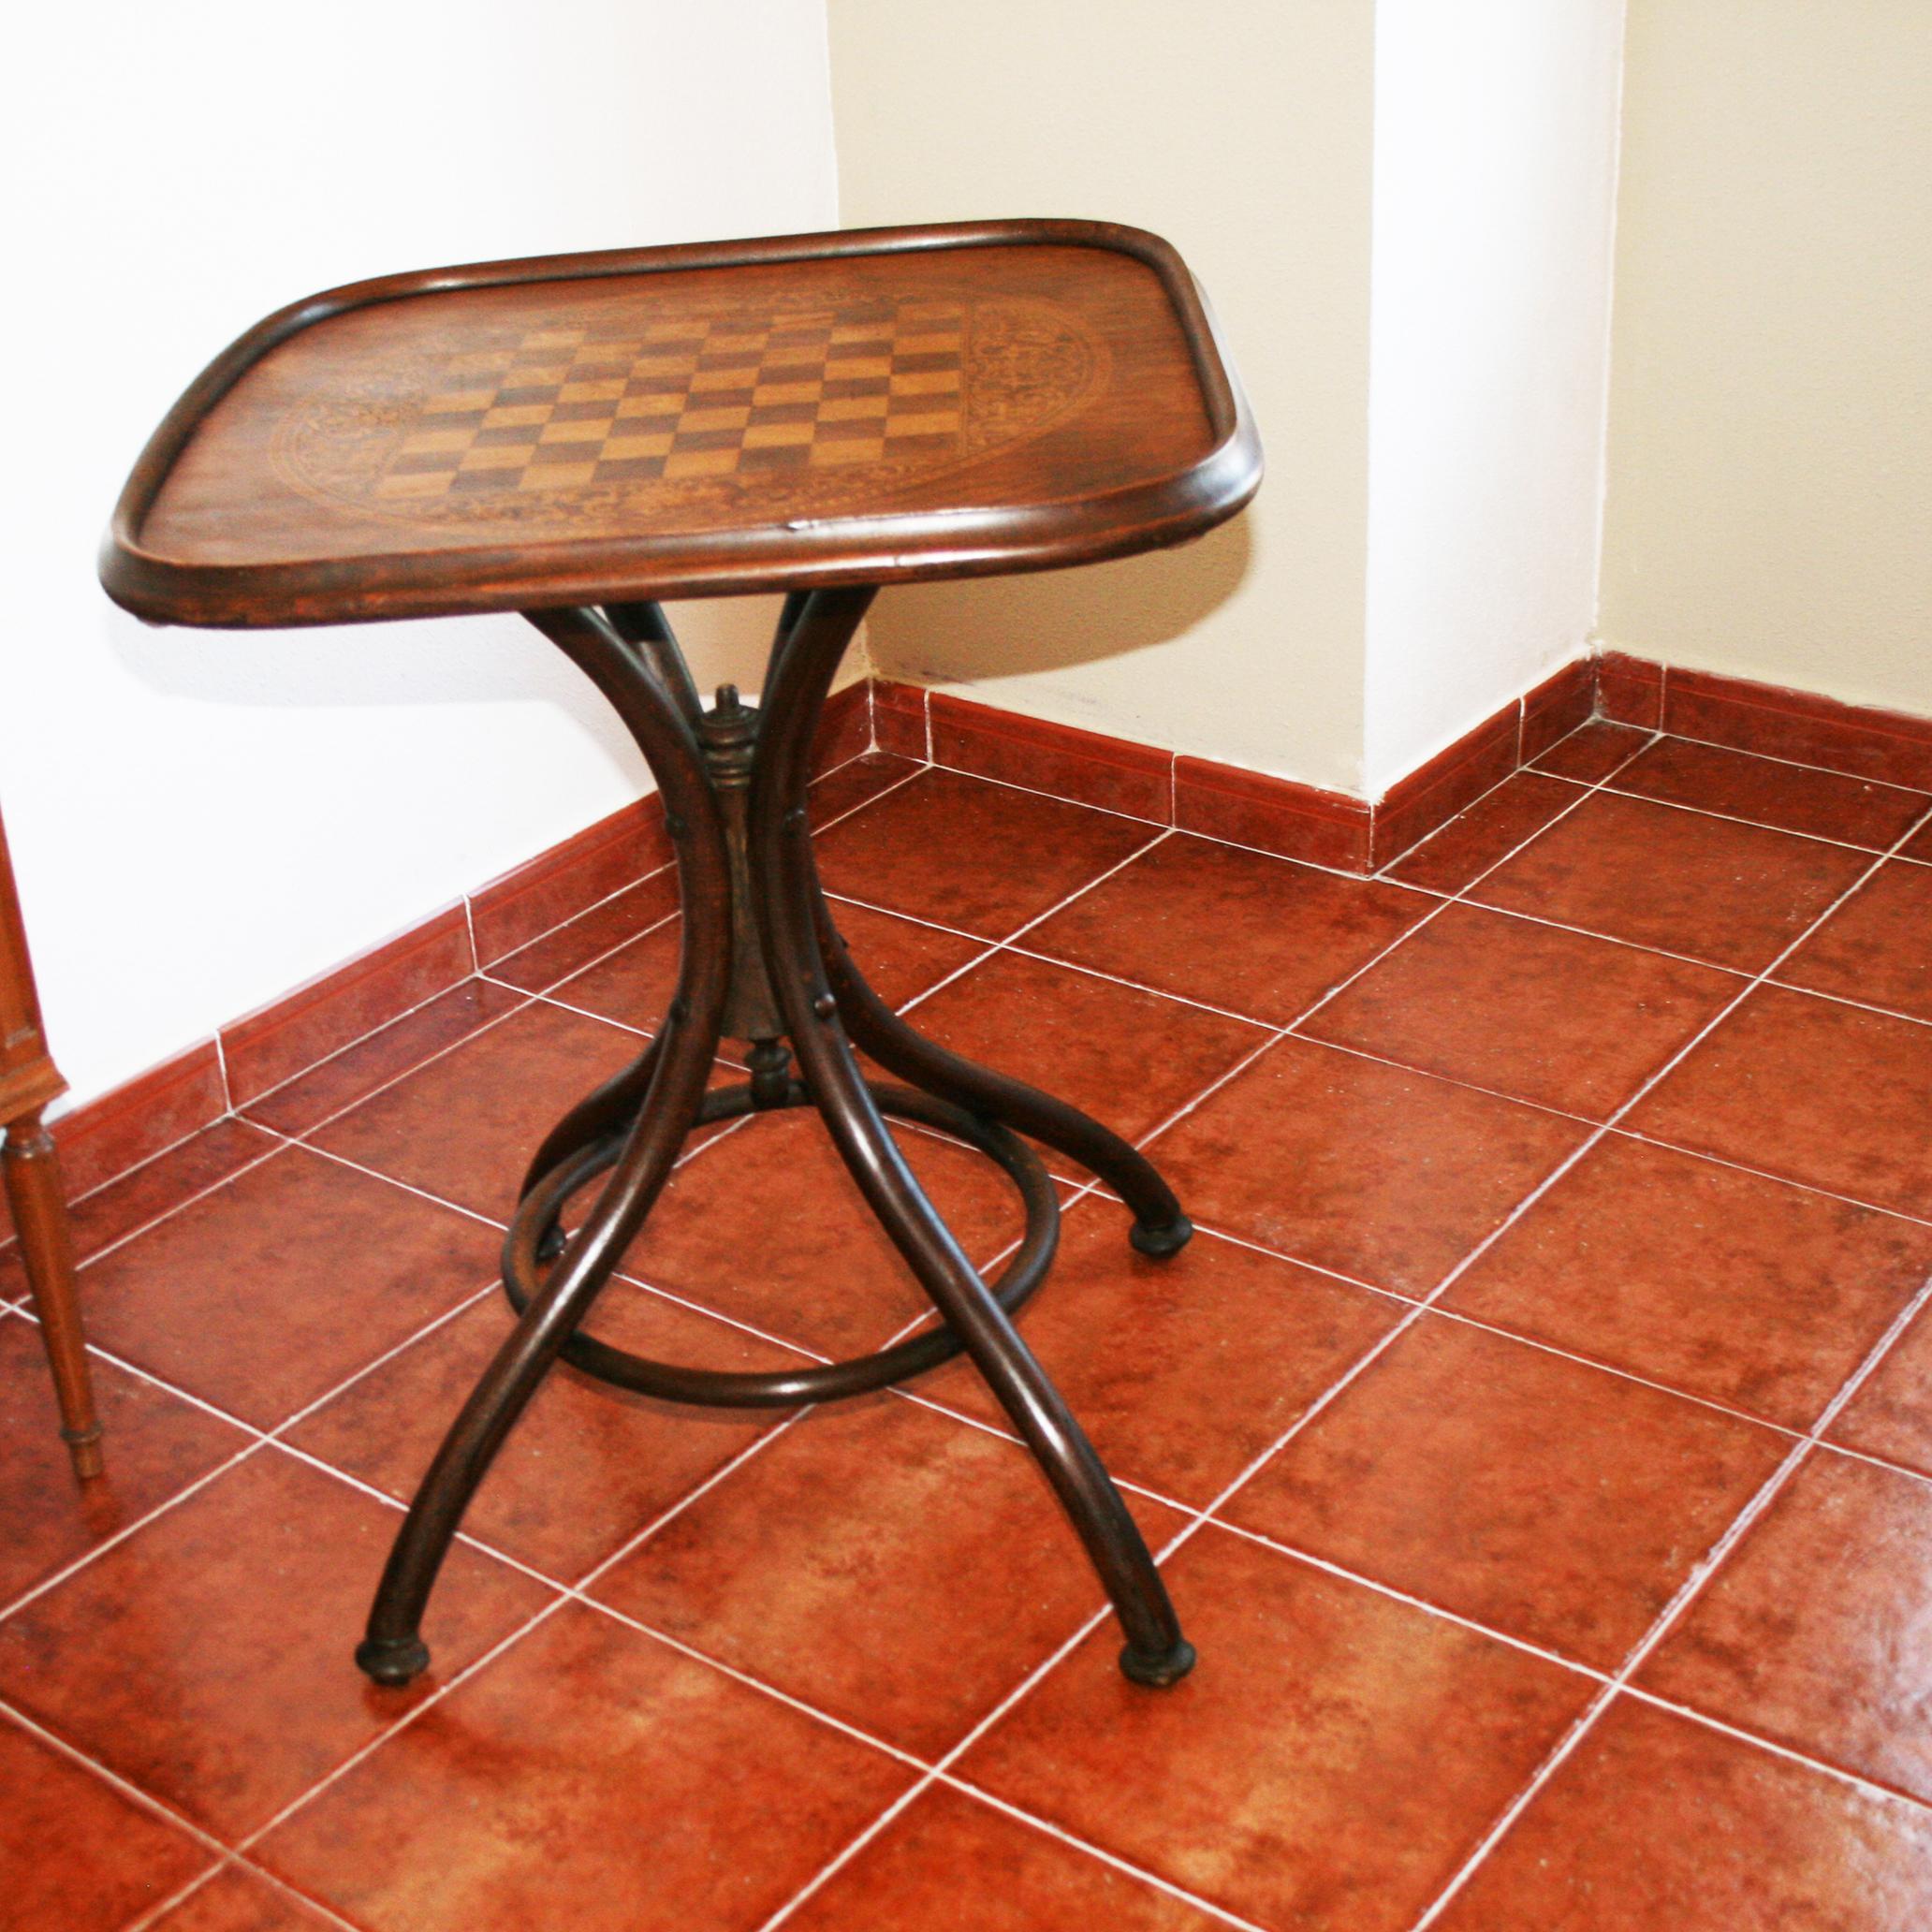 Thonet Style Bentwood Game Table, Late 19th Century or Early 20th Century 2